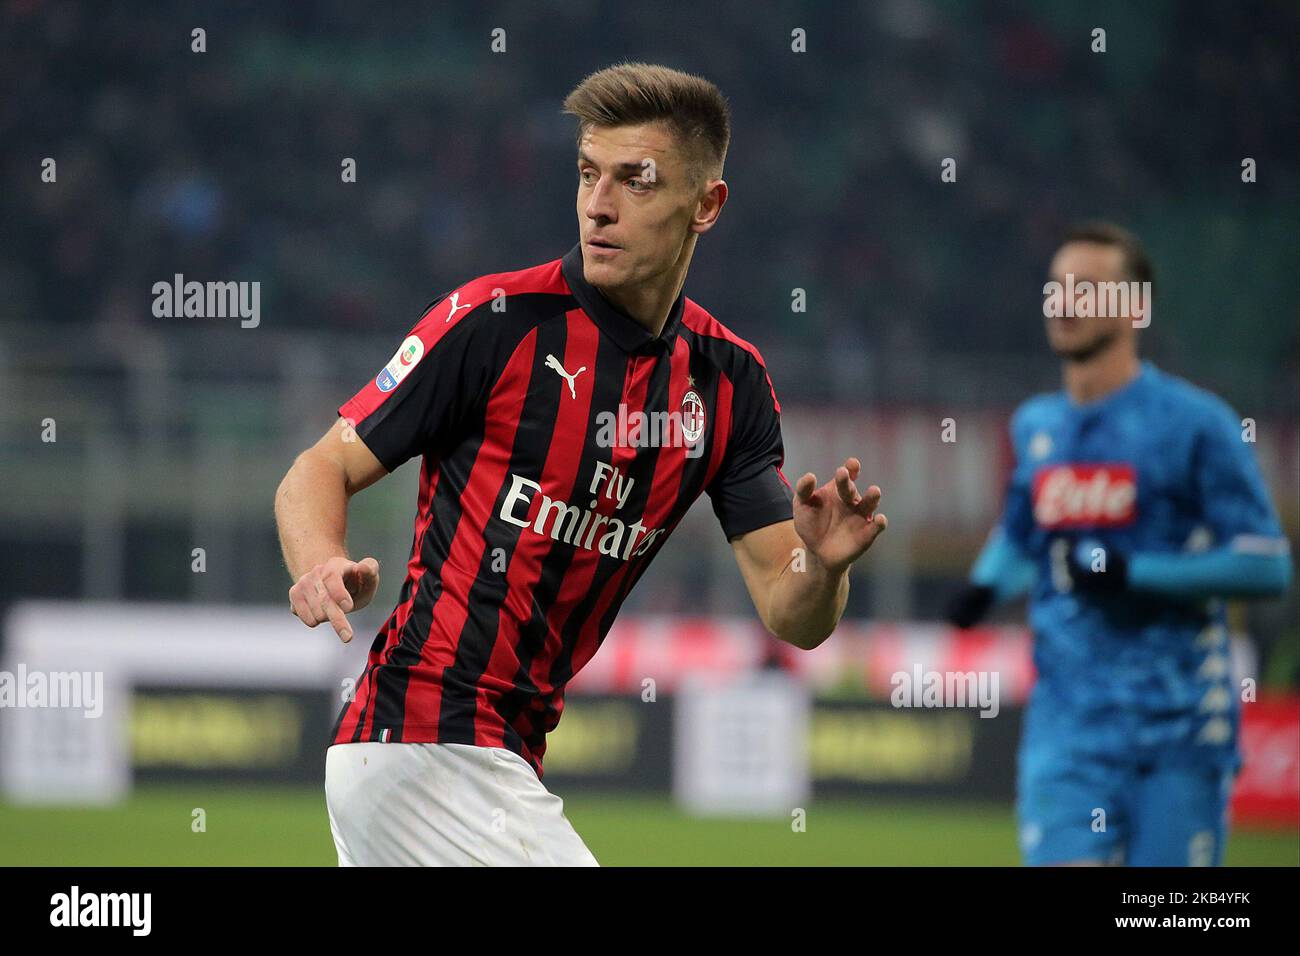 Krzysztof Piatek #19 of AC Milan during the serie A match between AC Milan and SSC Napoli at Stadio Giuseppe Meazza on January 26, 2018 in Milan, Italy. (Photo by Giuseppe Cottini/NurPhoto) Stock Photo